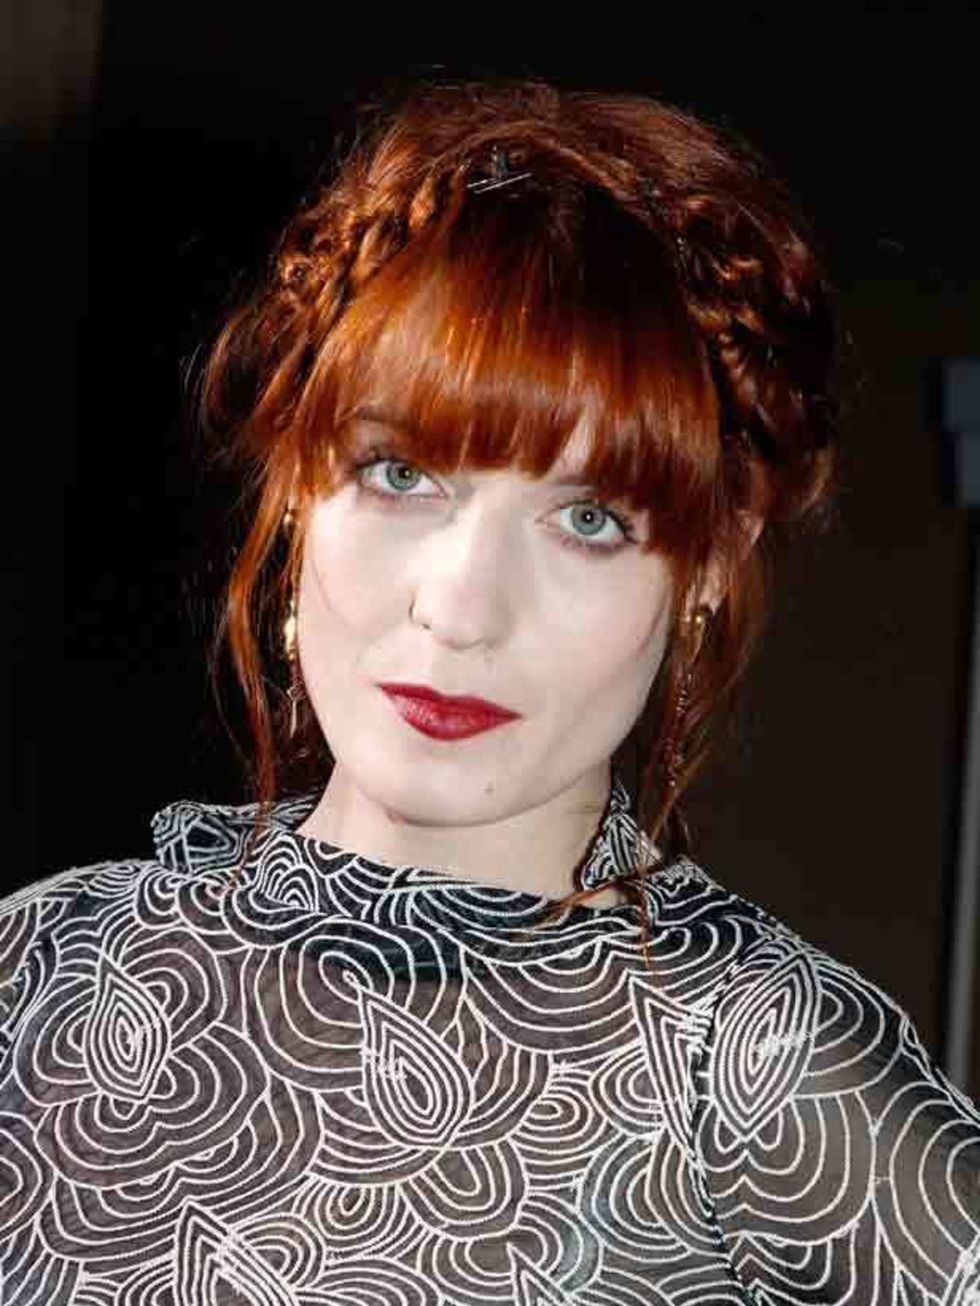 <p>Florence Welch at <a href="http://www.elleuk.com/catwalk/collections/yves-saint-laurent/">Yves Saint Laurent</a></p>